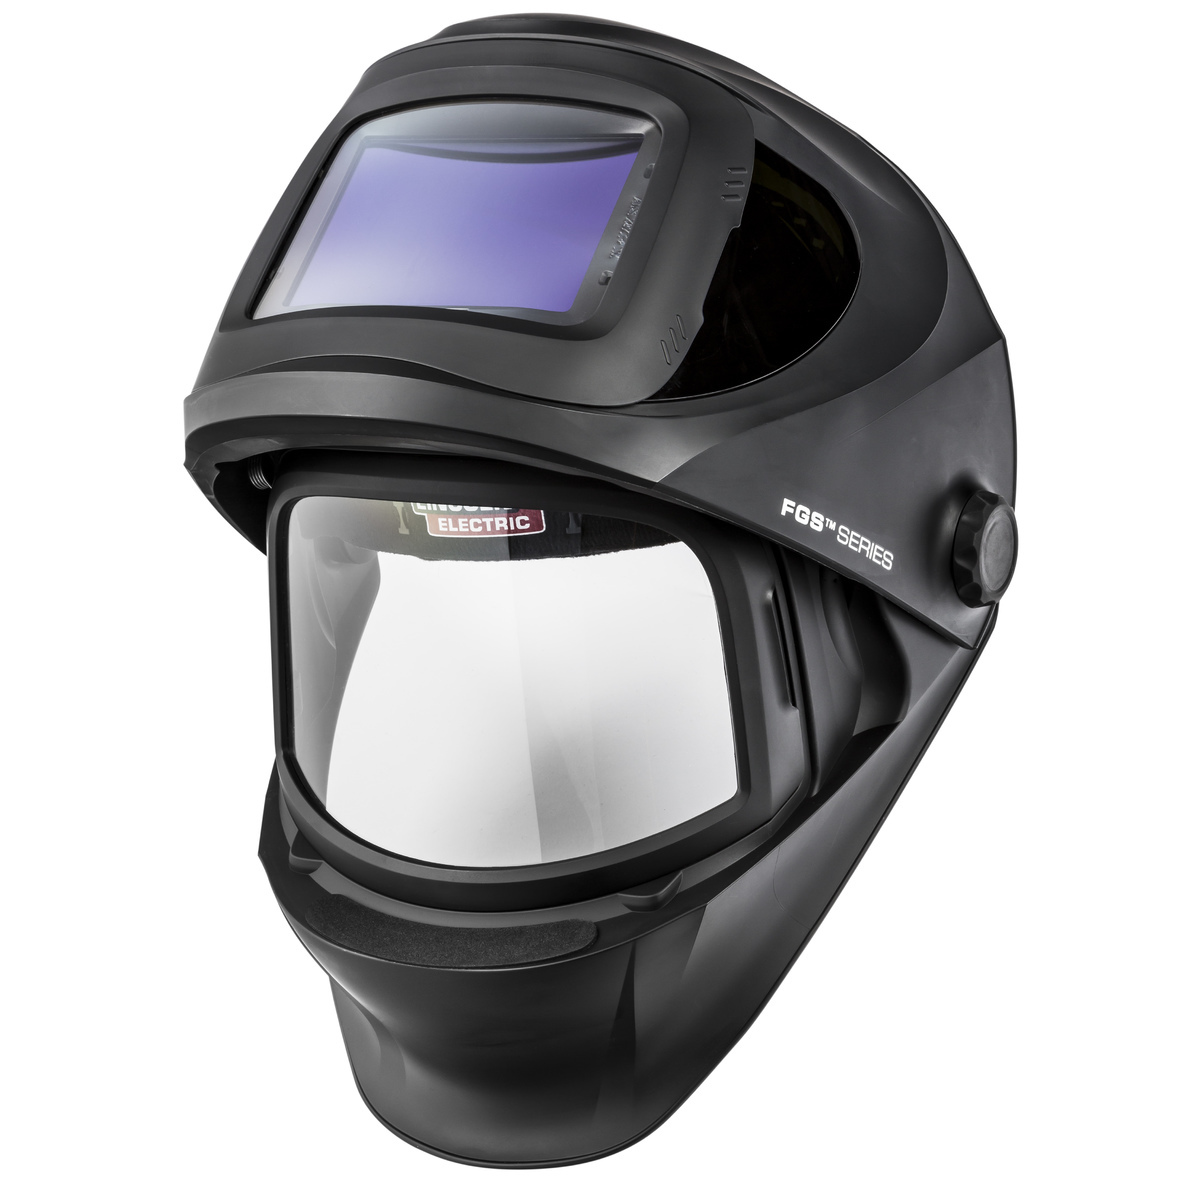 Lincoln Electric® VIKING® 3250D Black Welding Helmet With Variable Shades 5 - 13 Auto Darkening Lens, 4C® Lens Technology